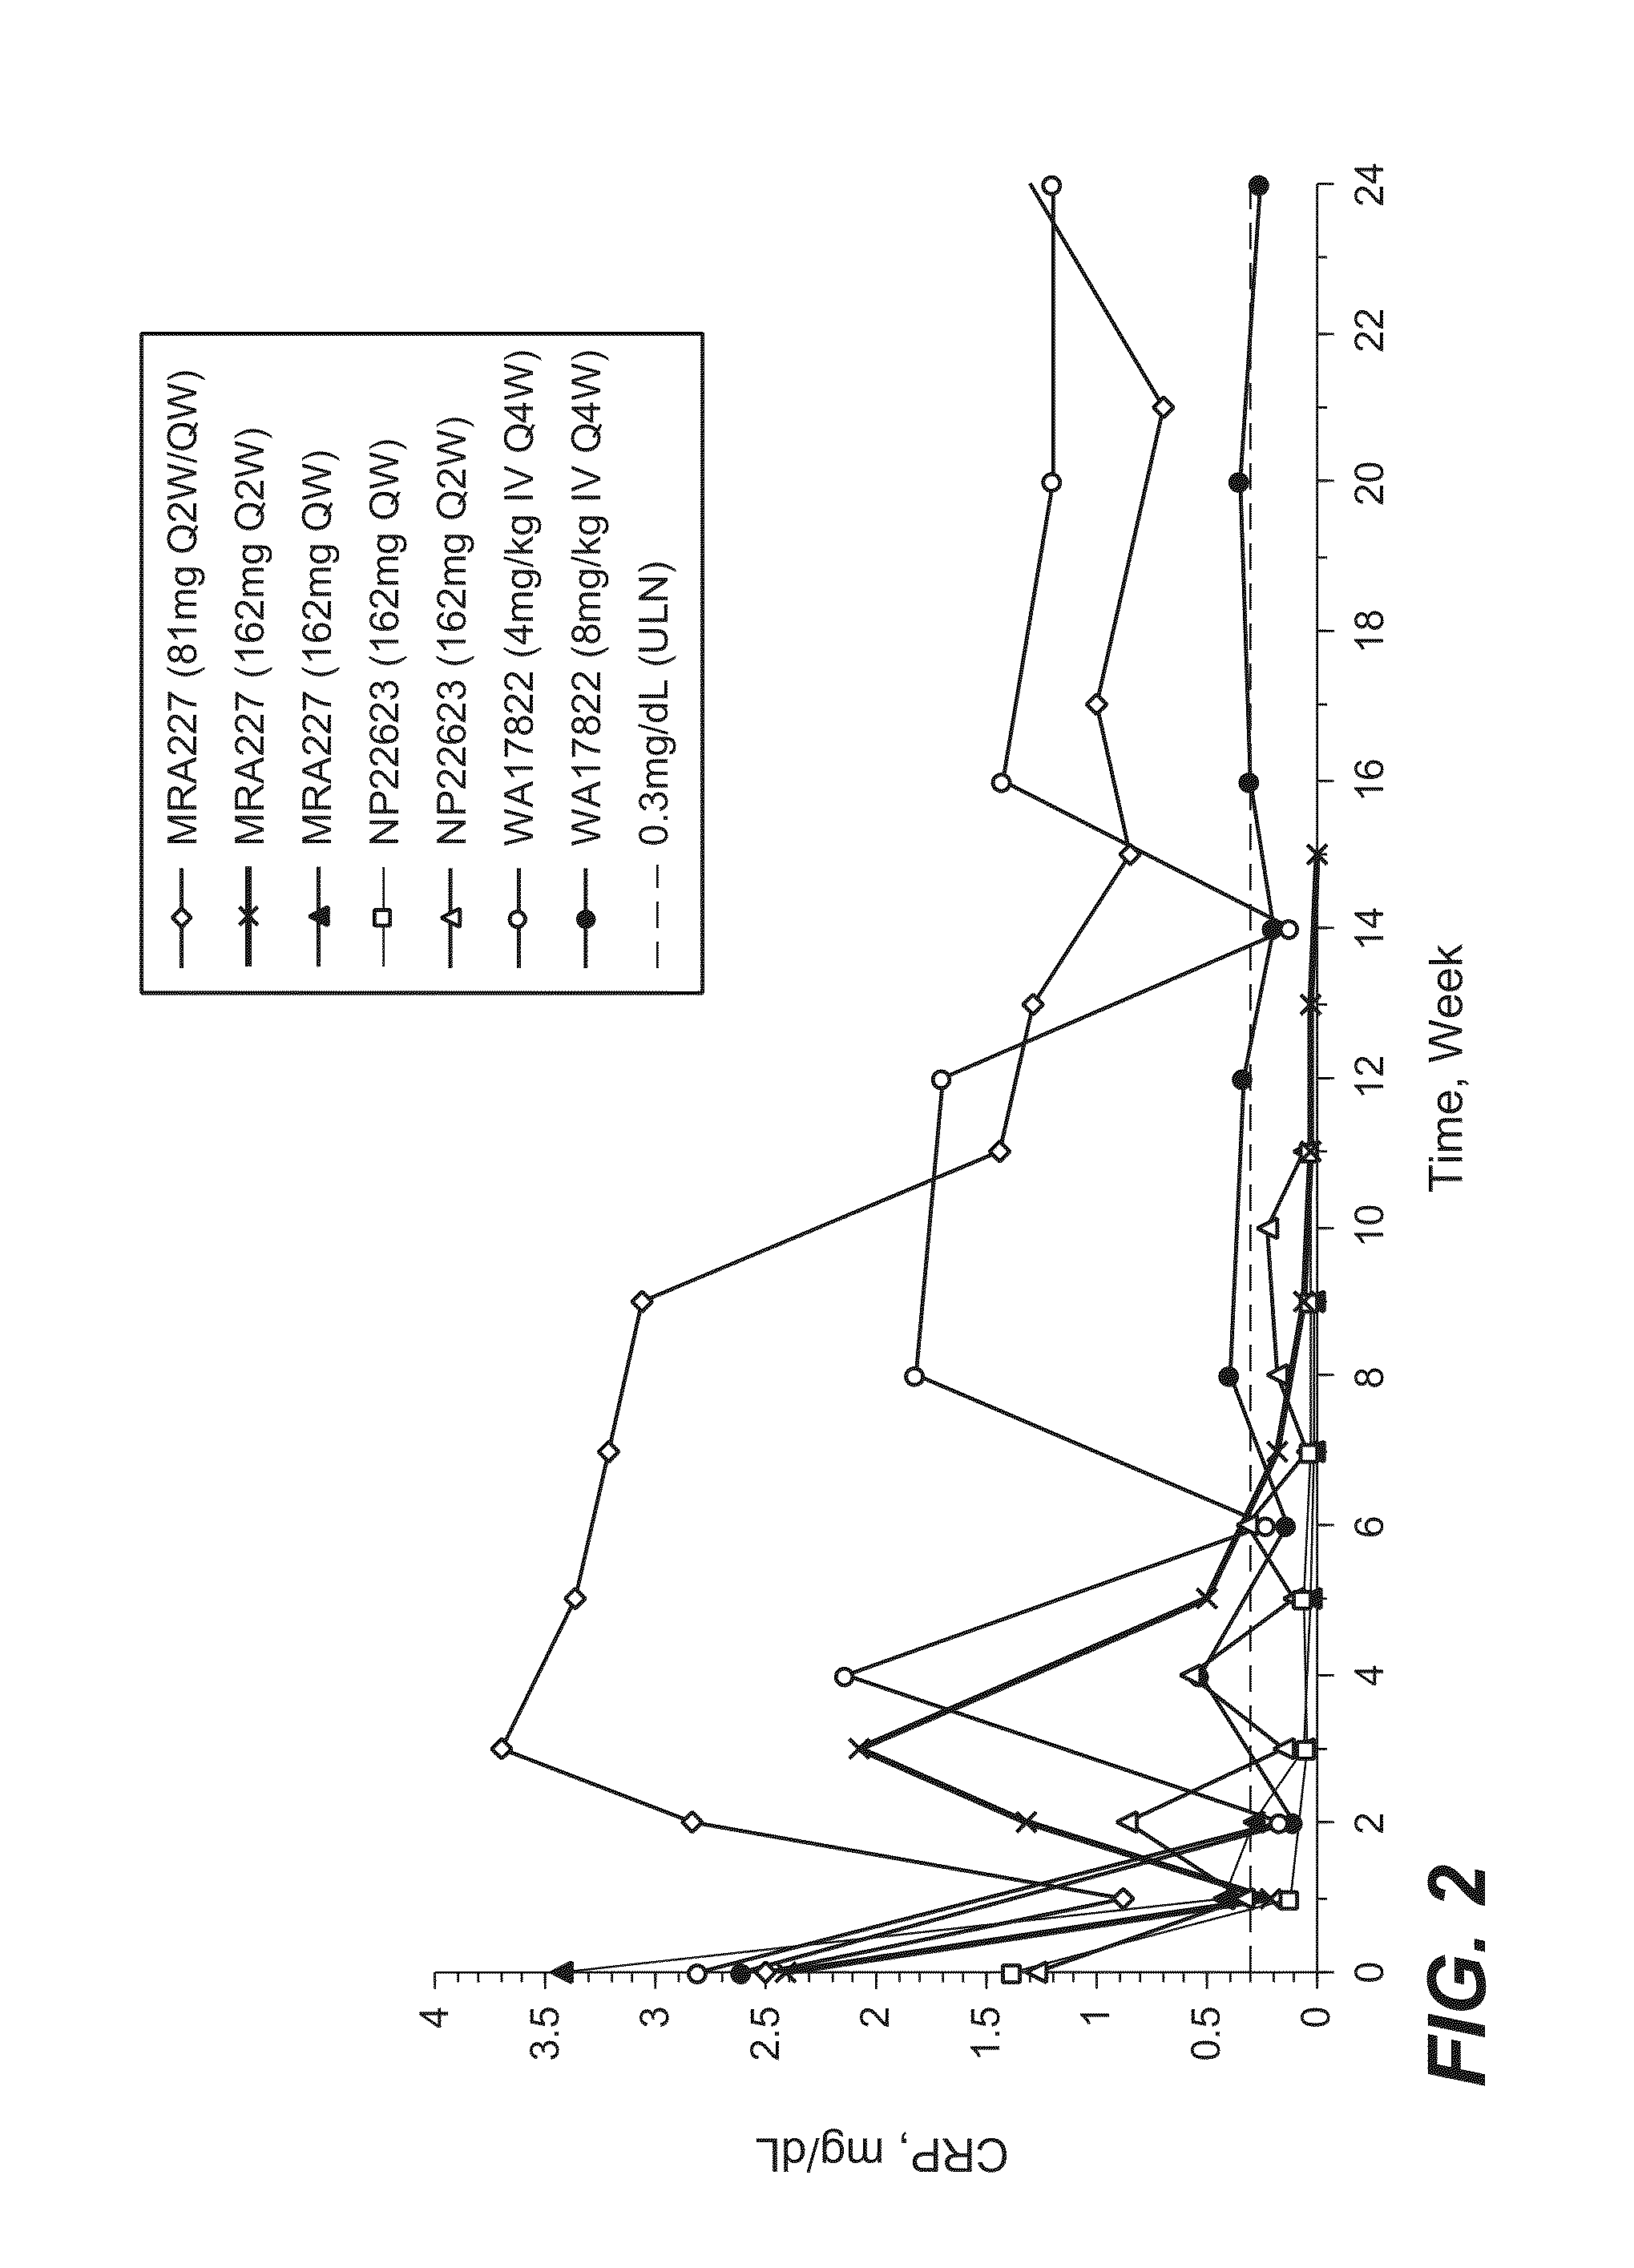 Subcutaneously administered anti-IL-6 receptor antibody